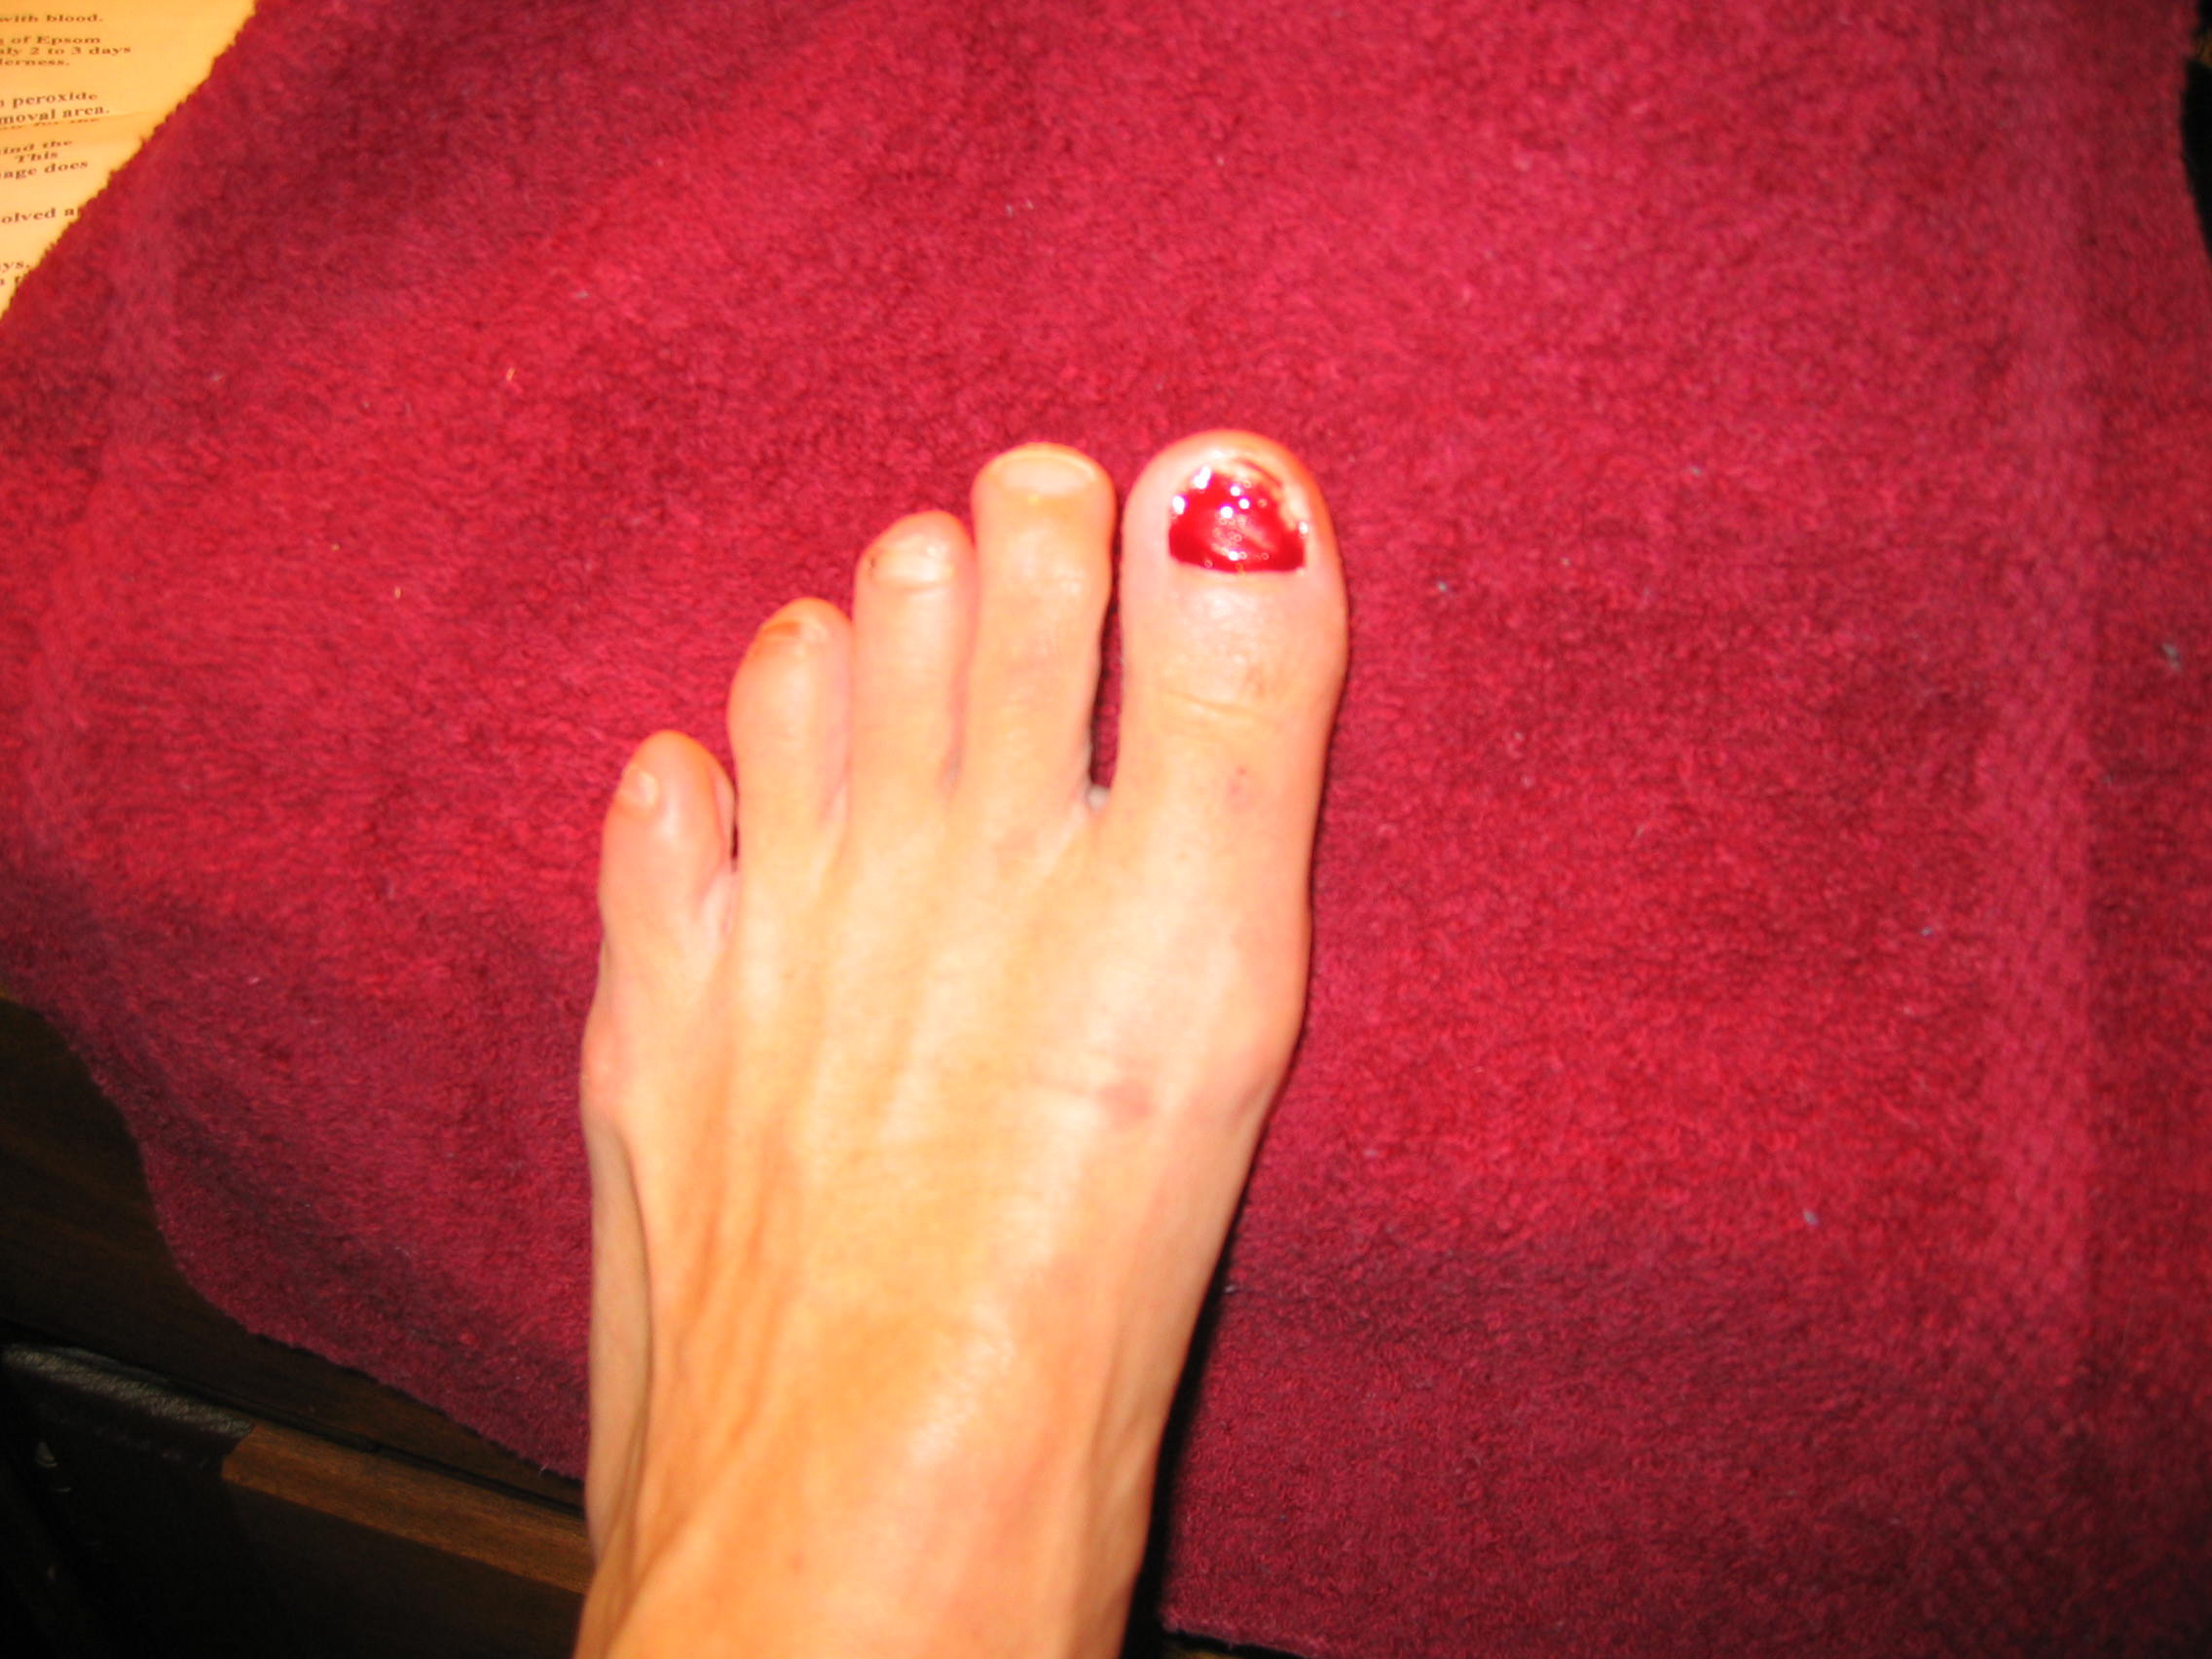 Day 1:  toenail removed and phenol applied to burn the nail bed.